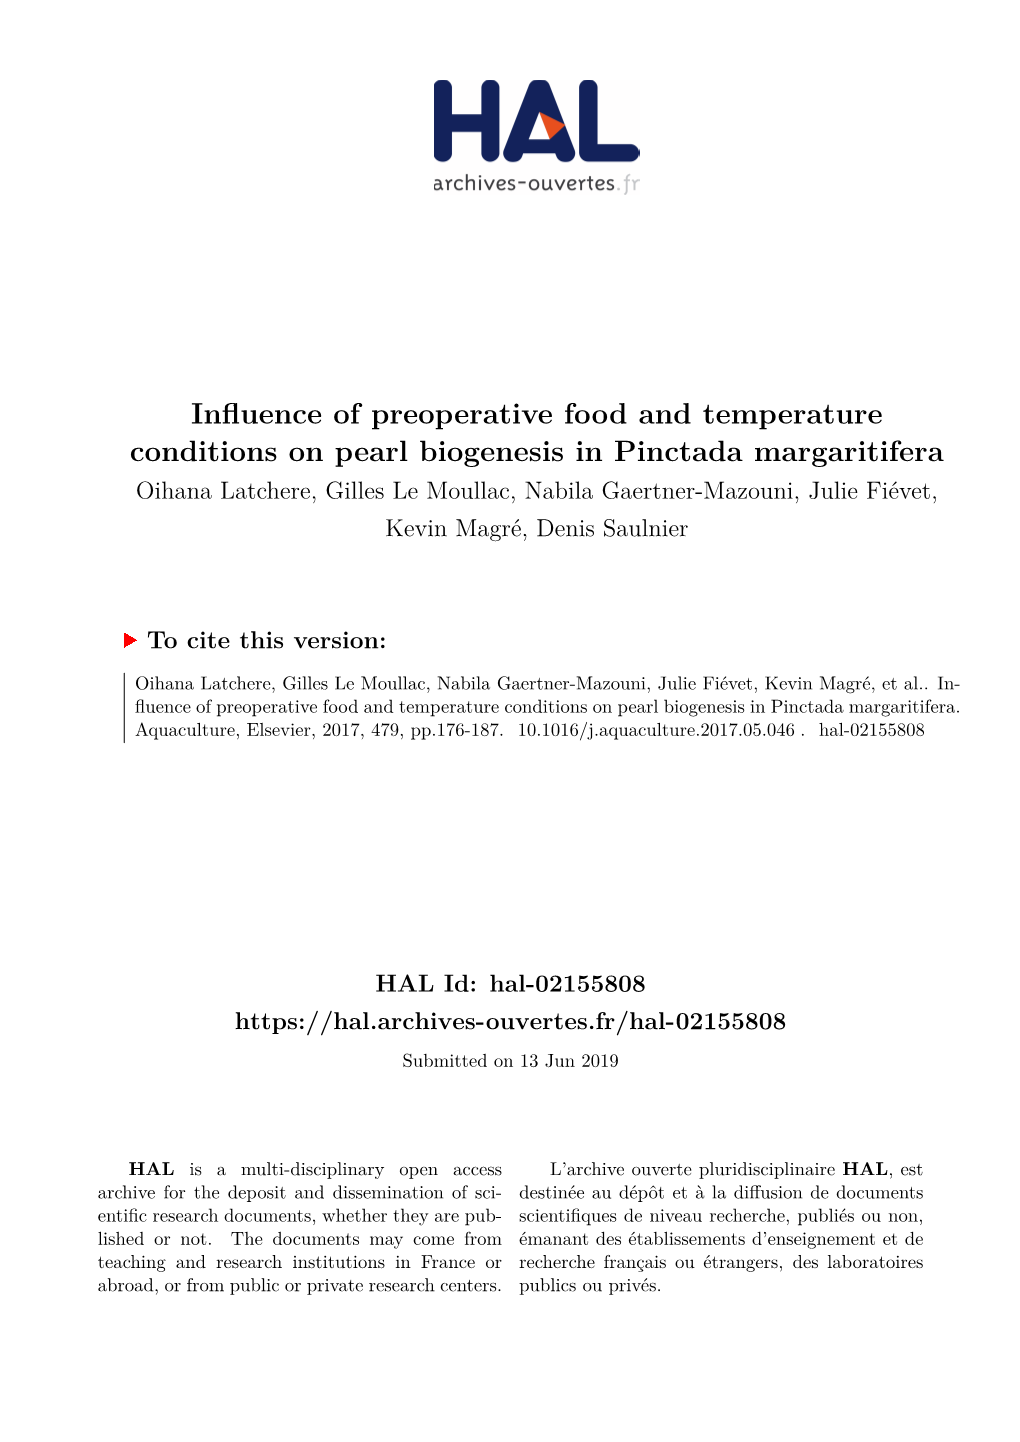 Influence of Preoperative Food and Temperature Conditions on Pearl